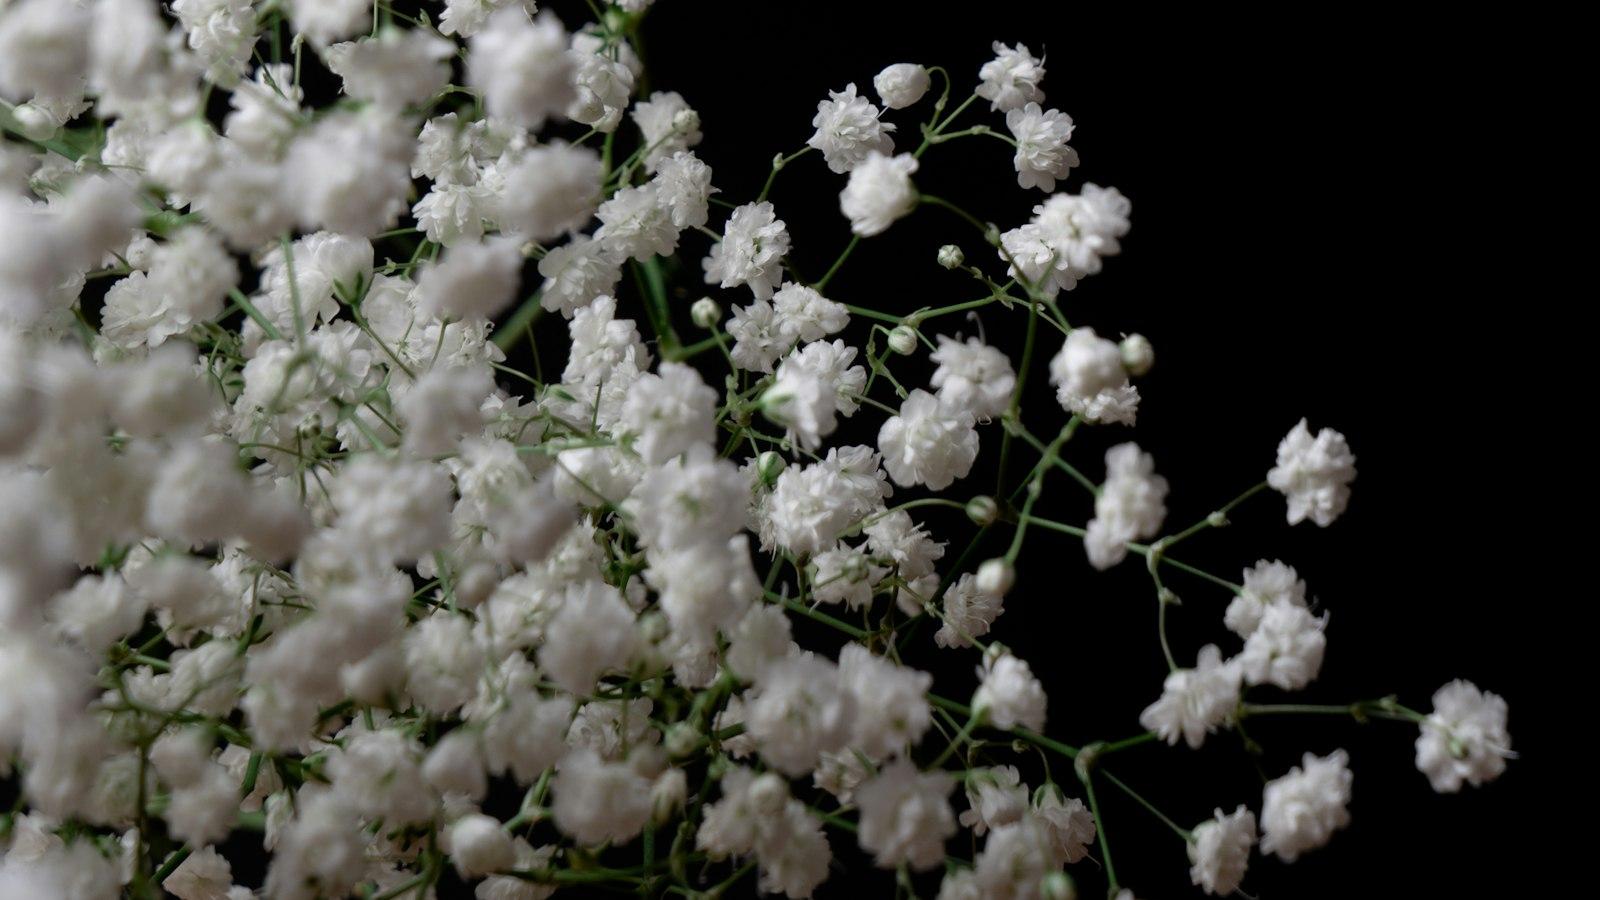 Does Baby’s Breath Smell